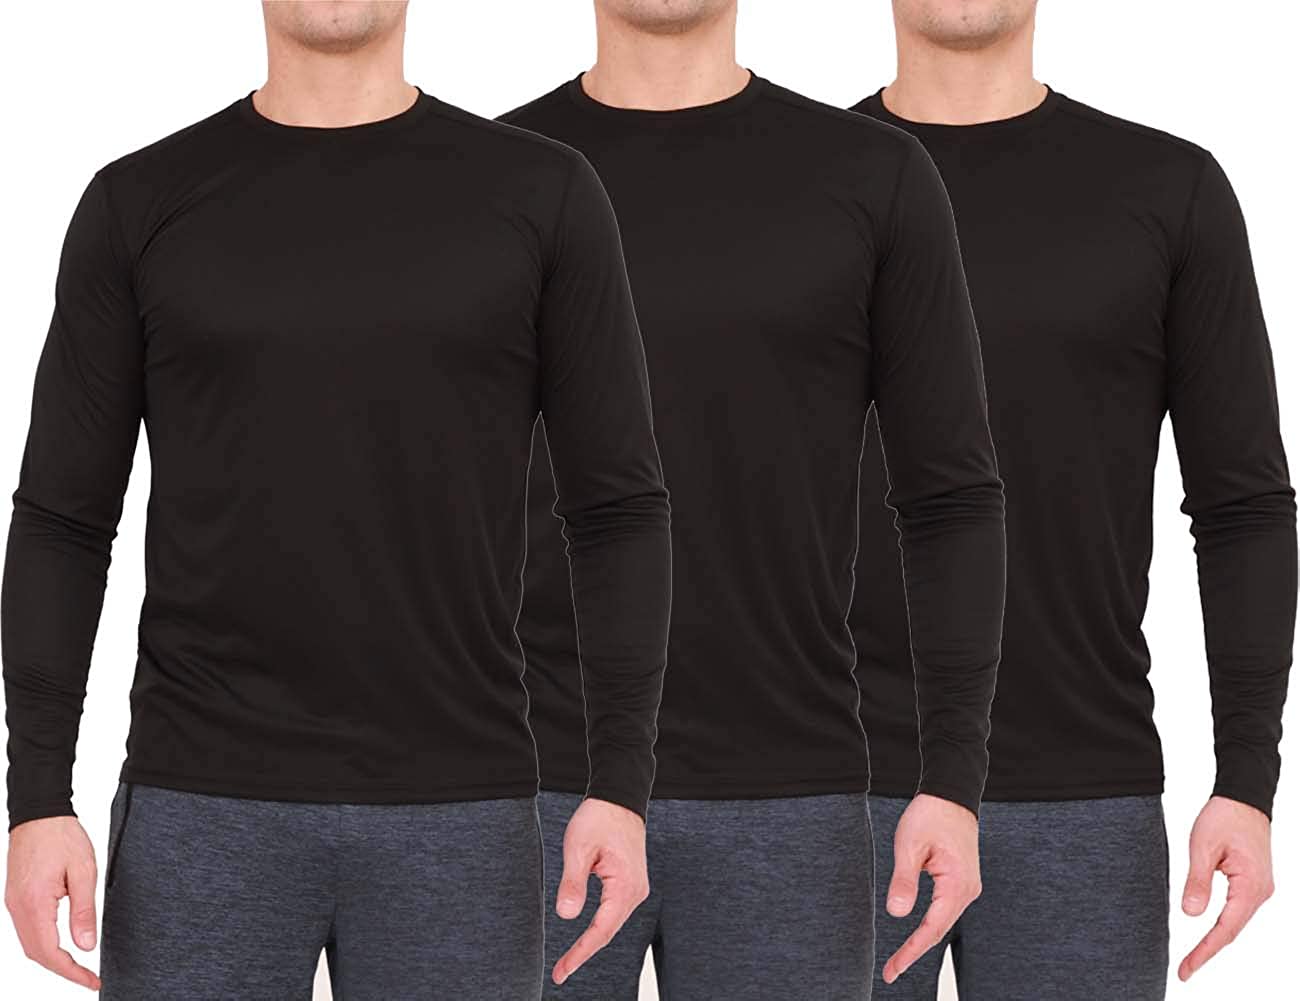 Quick-Dry and Lightweight Workout T-Shirts AyeGoo Men’s 3 Pack Long Sleeve Performance Running Shirts,Sun Protection Shirts 